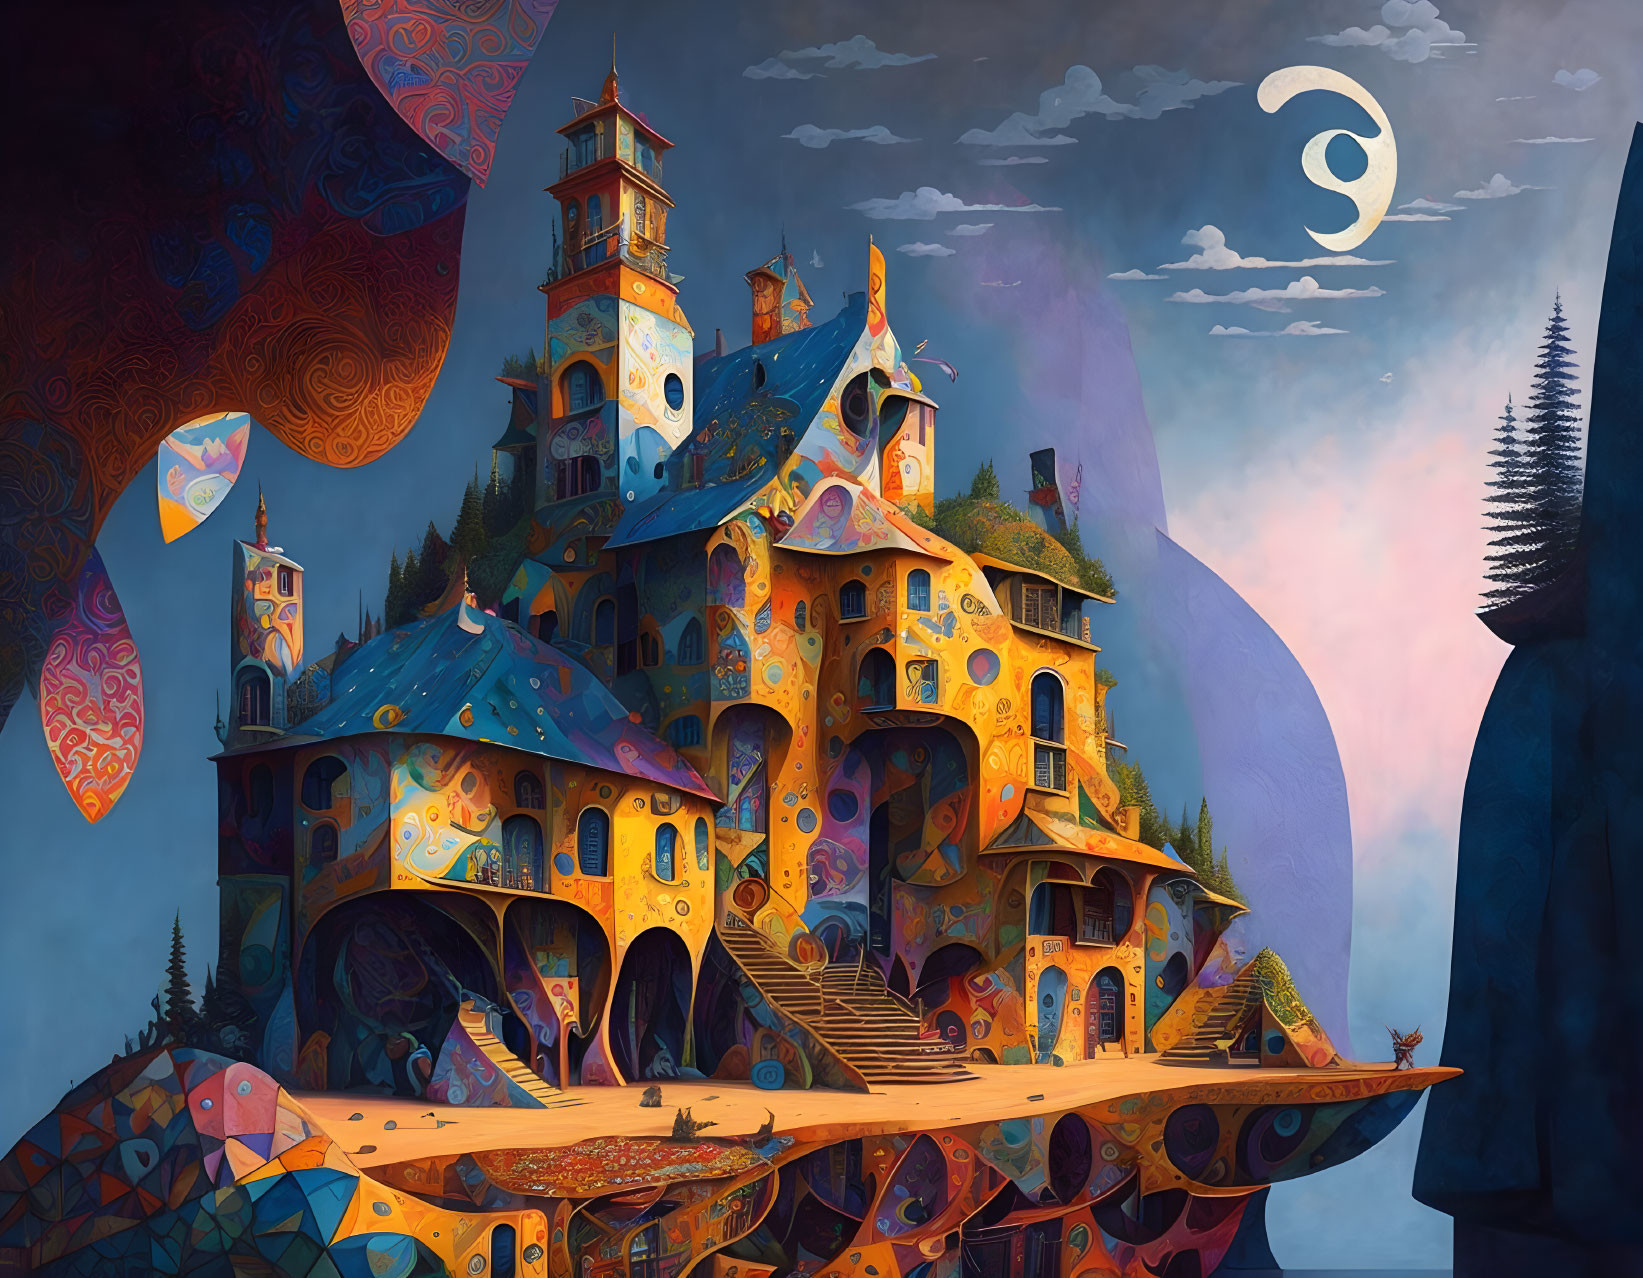 Fantasy Castle with Intricate Patterns and Crescent Moon under Twilight Sky